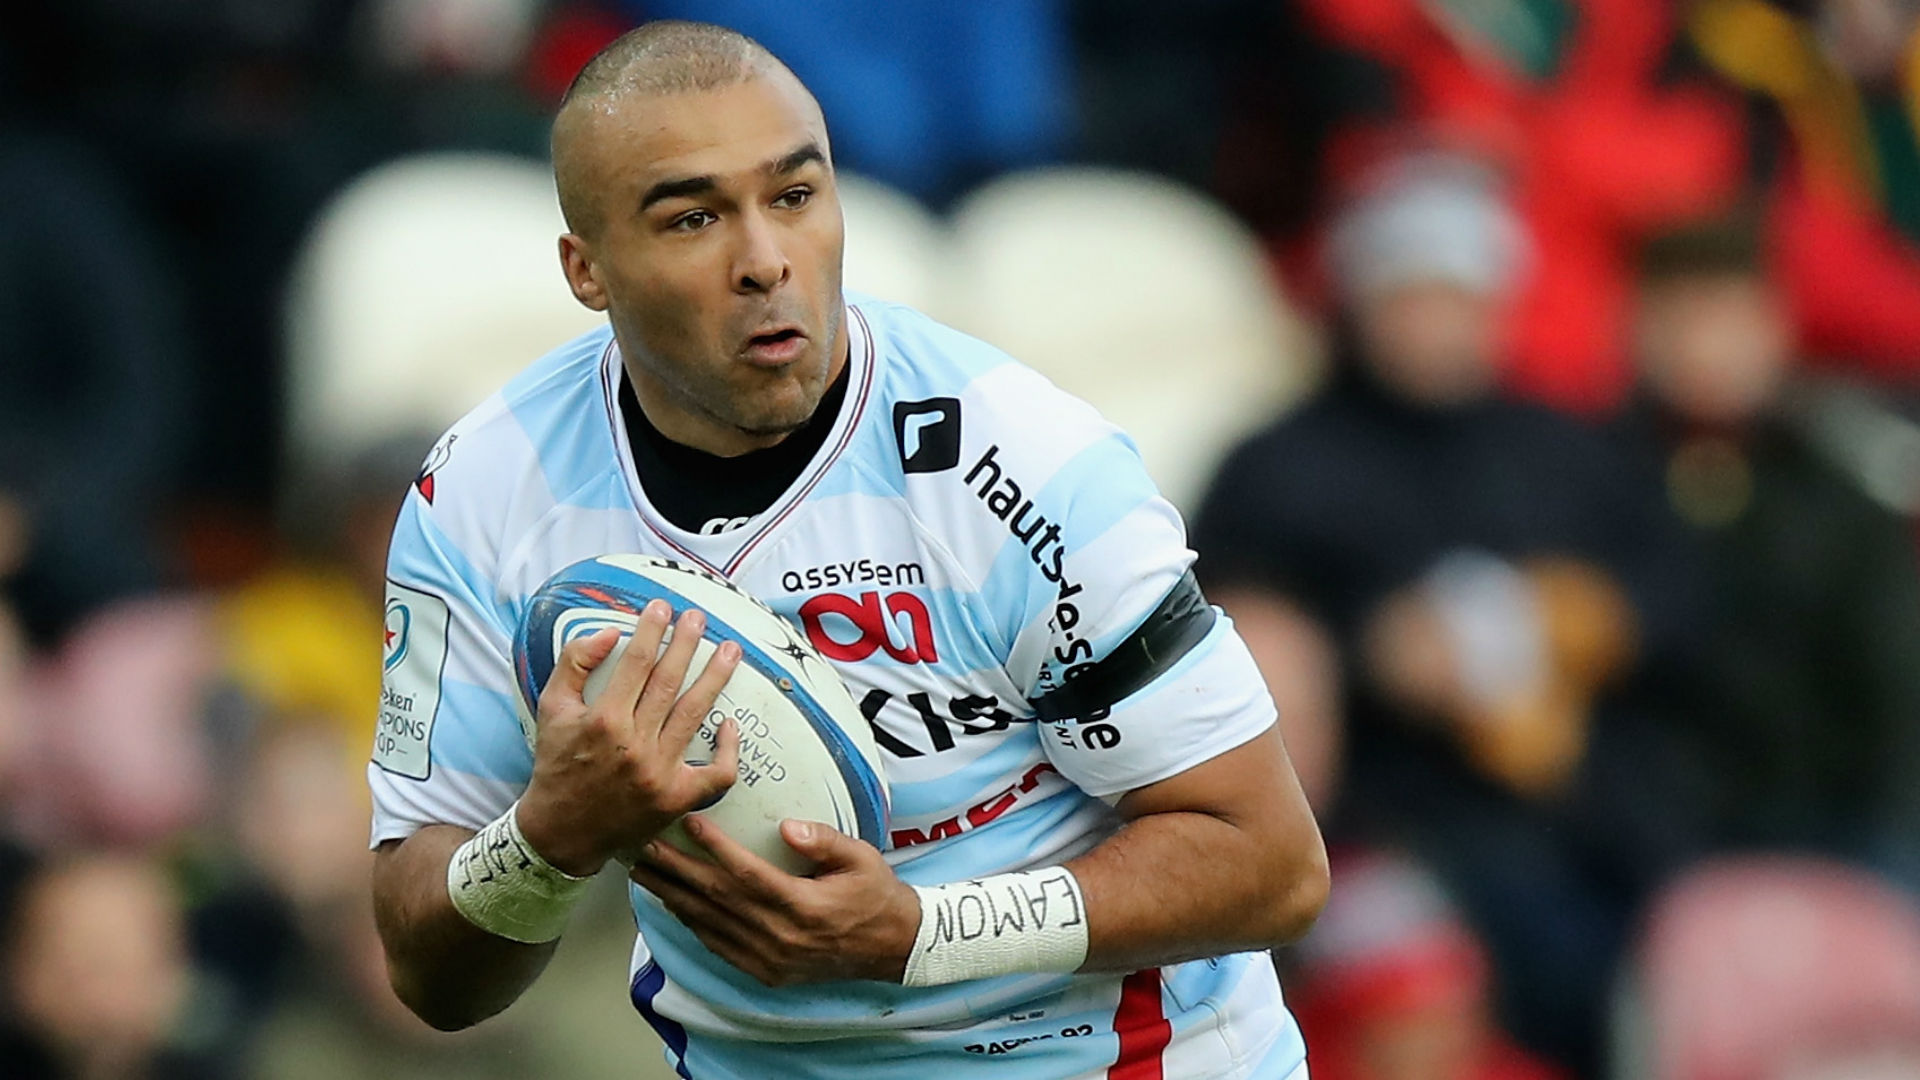 Perpignan suffered a 23rd loss in 25 Top 14 games as Louis Dupichot and Simon Zebo scored hat-tricks in Racing 92's 52-14 victory.